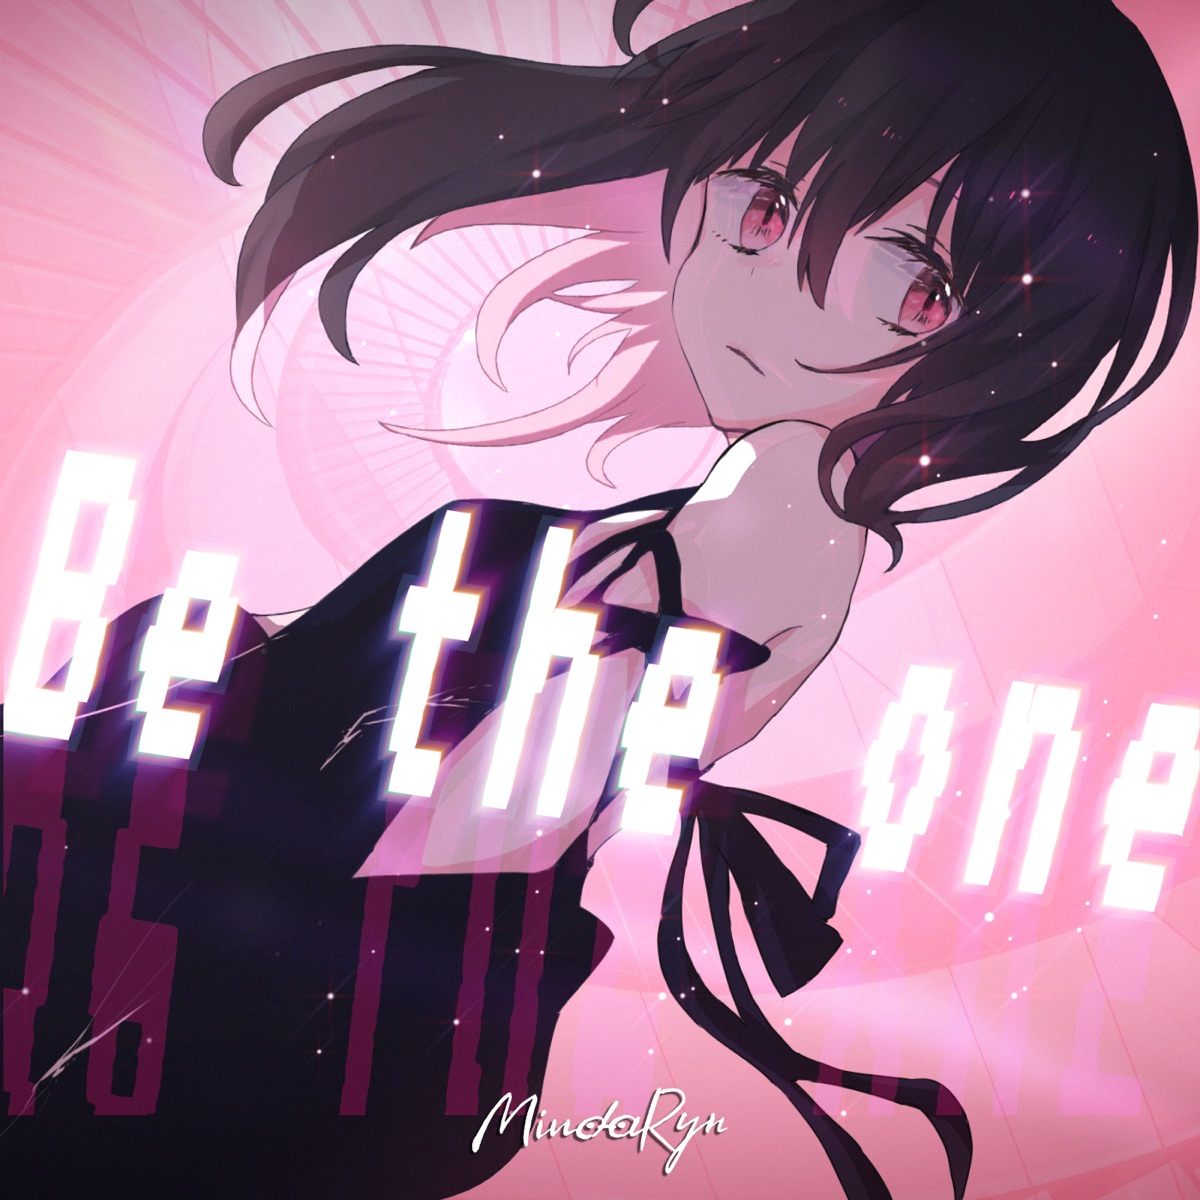 『MindaRyn - Be the one』収録の『Be the one』ジャケット